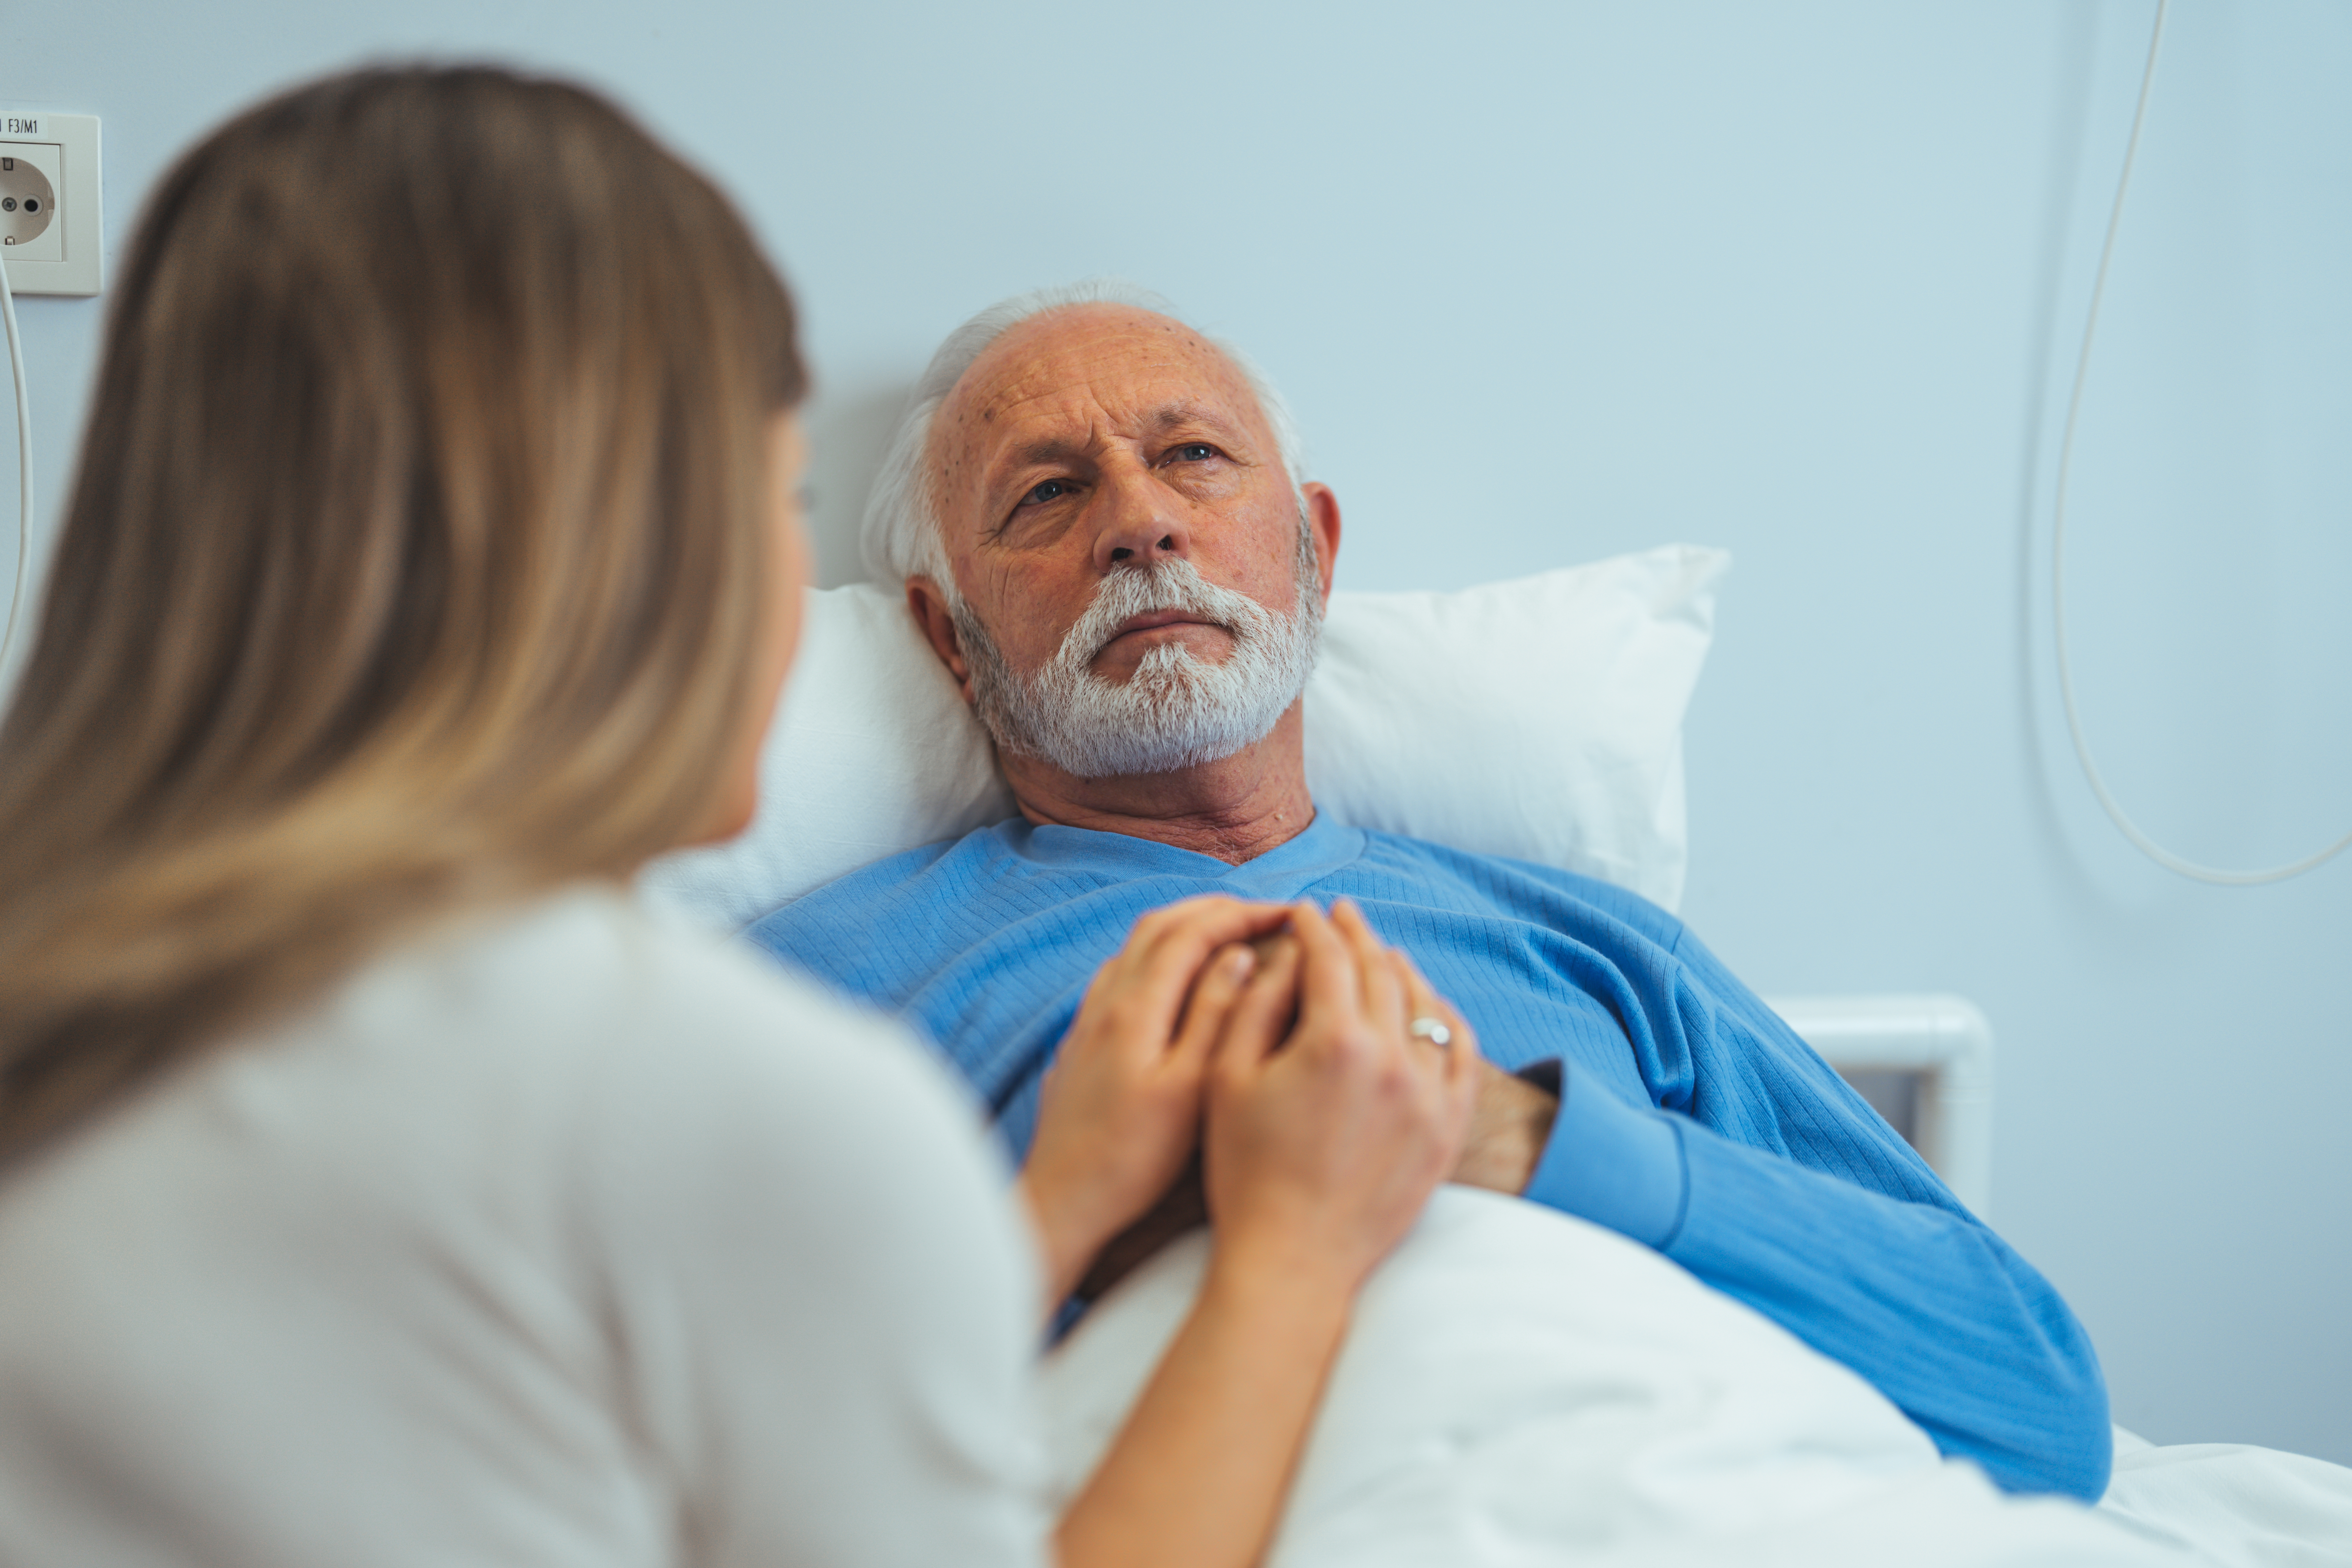 A woman visiting an older man in a hospital room | Source: Shutterstock